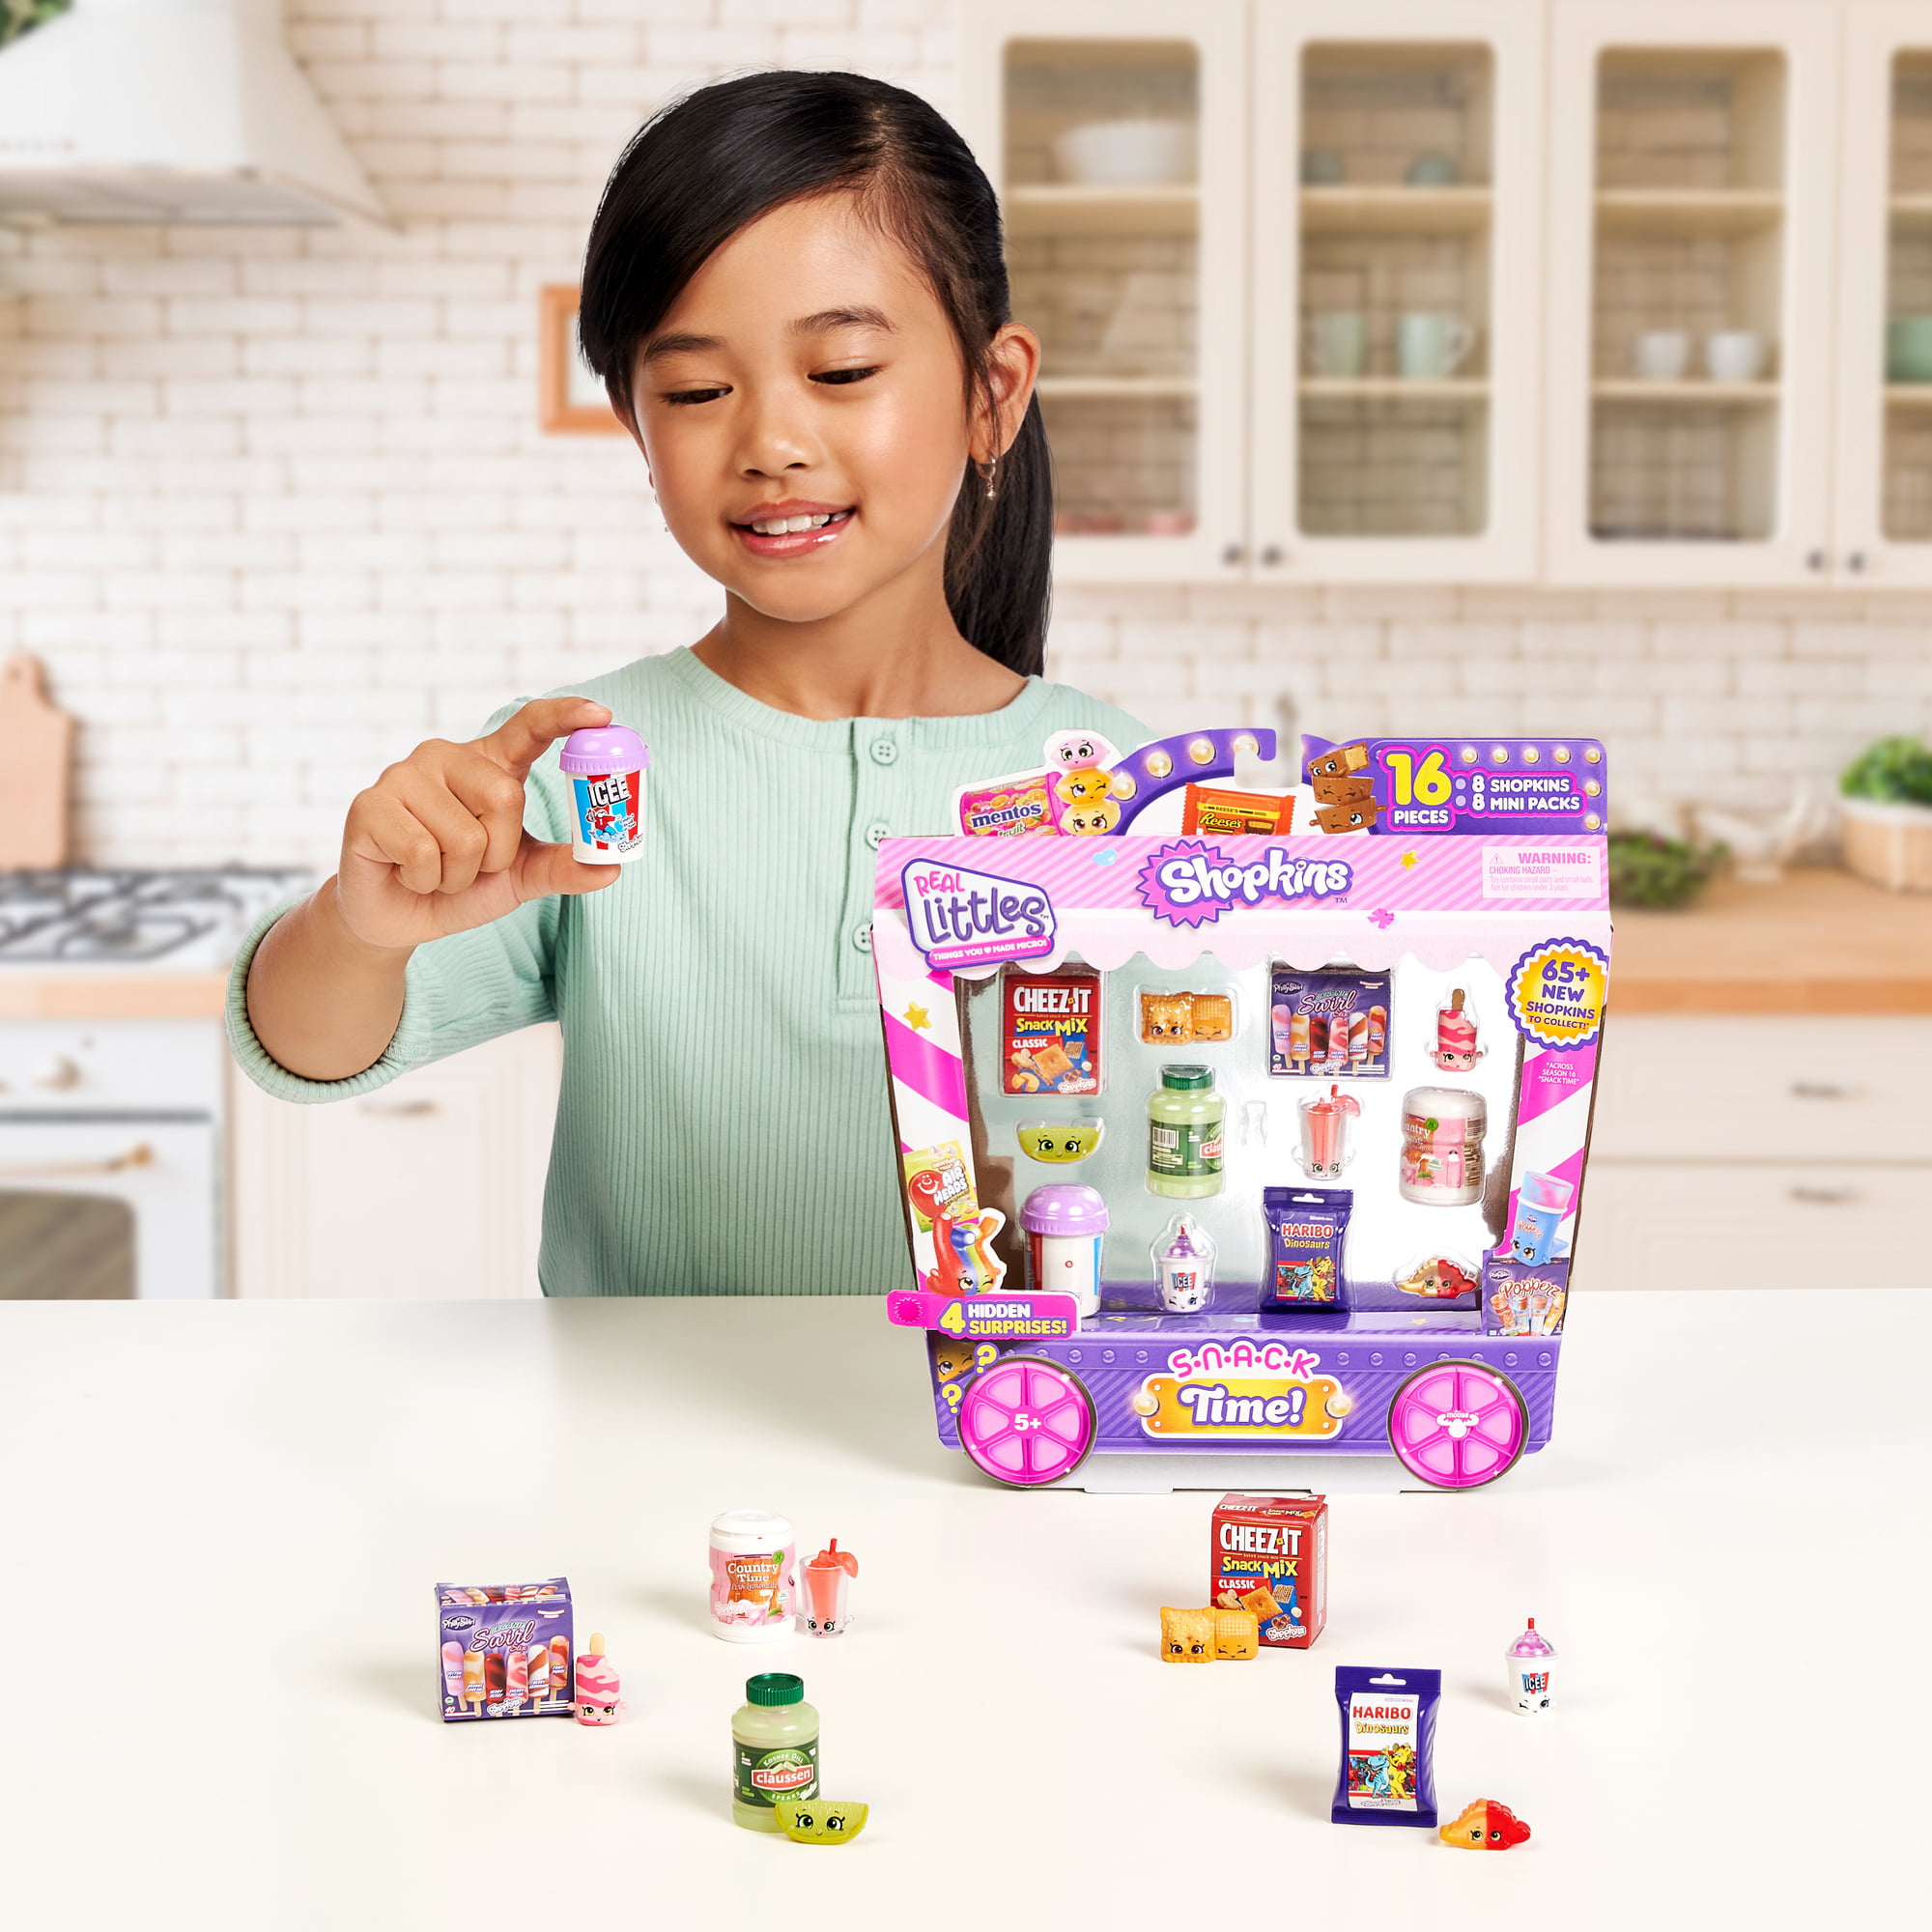 Shopkins Real Littles Shopper Pack, Collection, Girls, Ages 5+ 